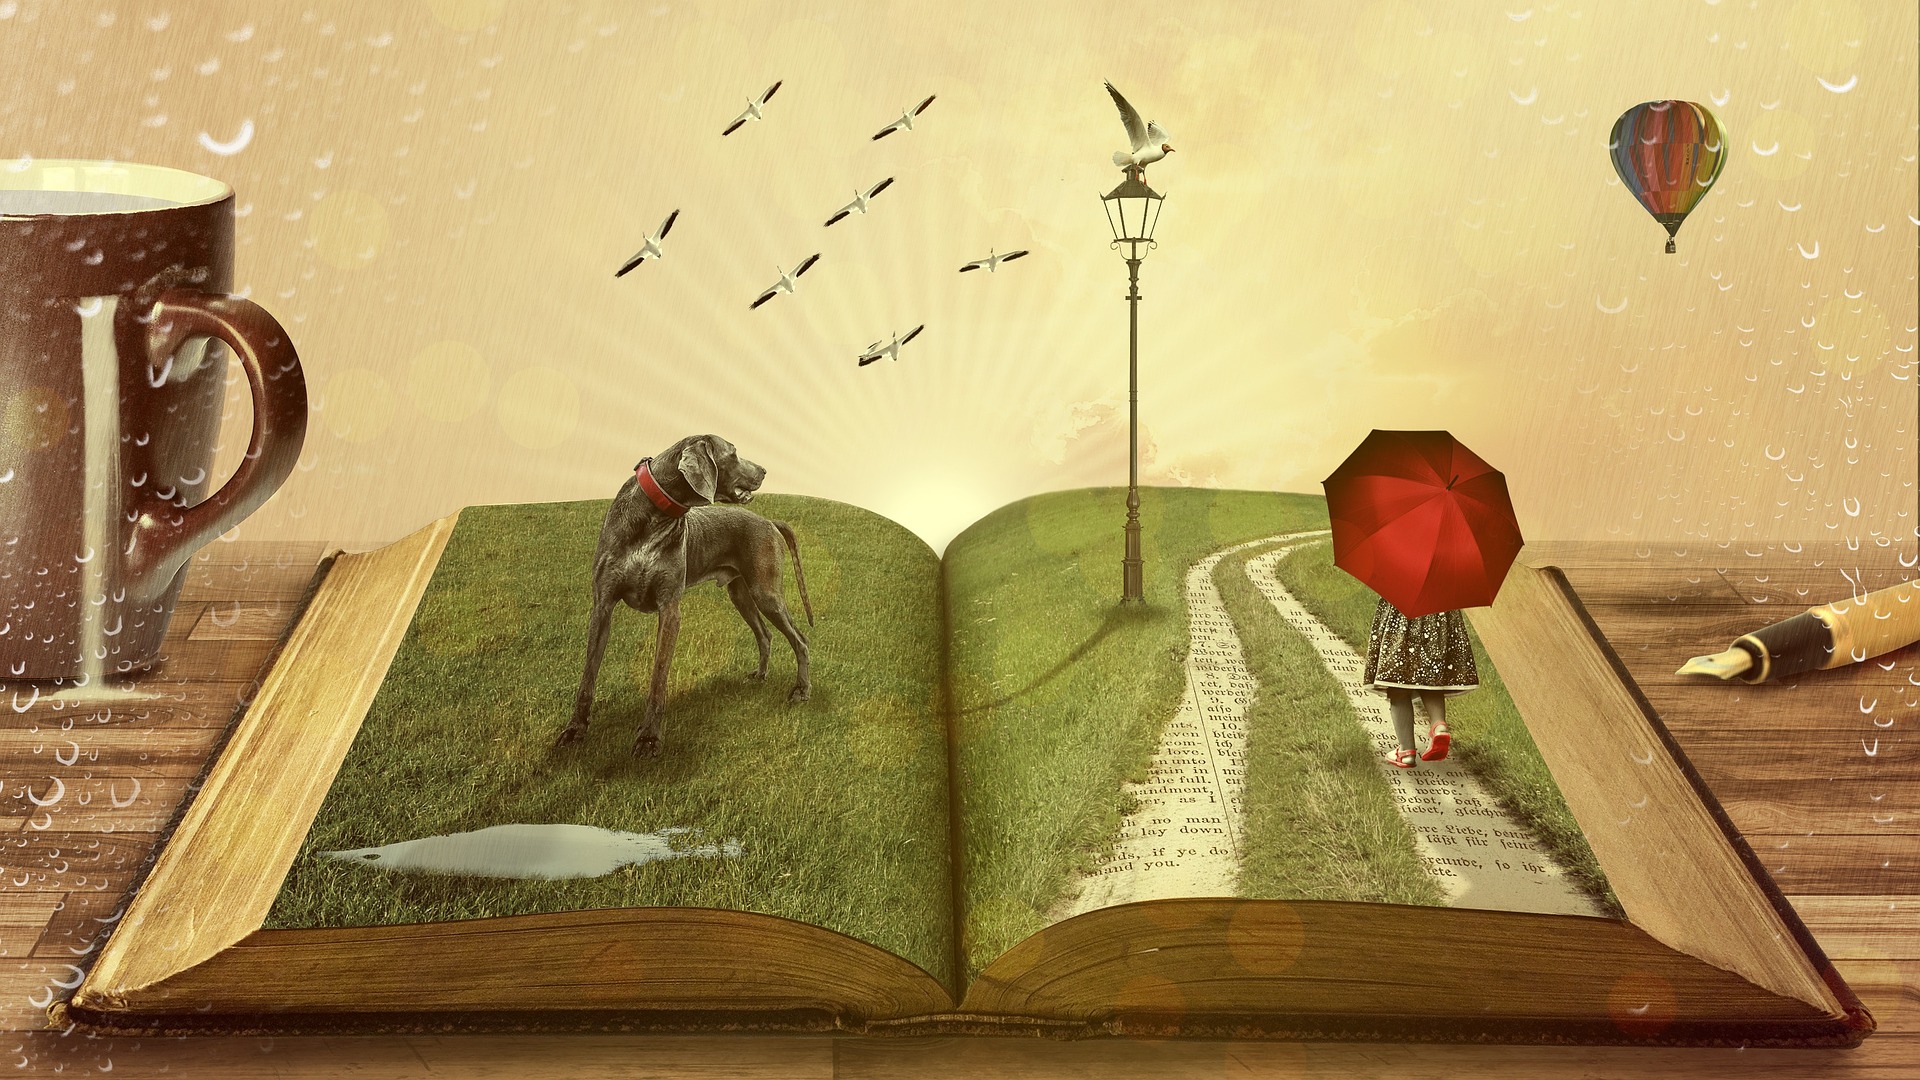 A surreal collage like art piece of a small dog and a girl holding an umbrella standing atop an open book whose pages are sprouting grass | Amy Jo Trier-Walker